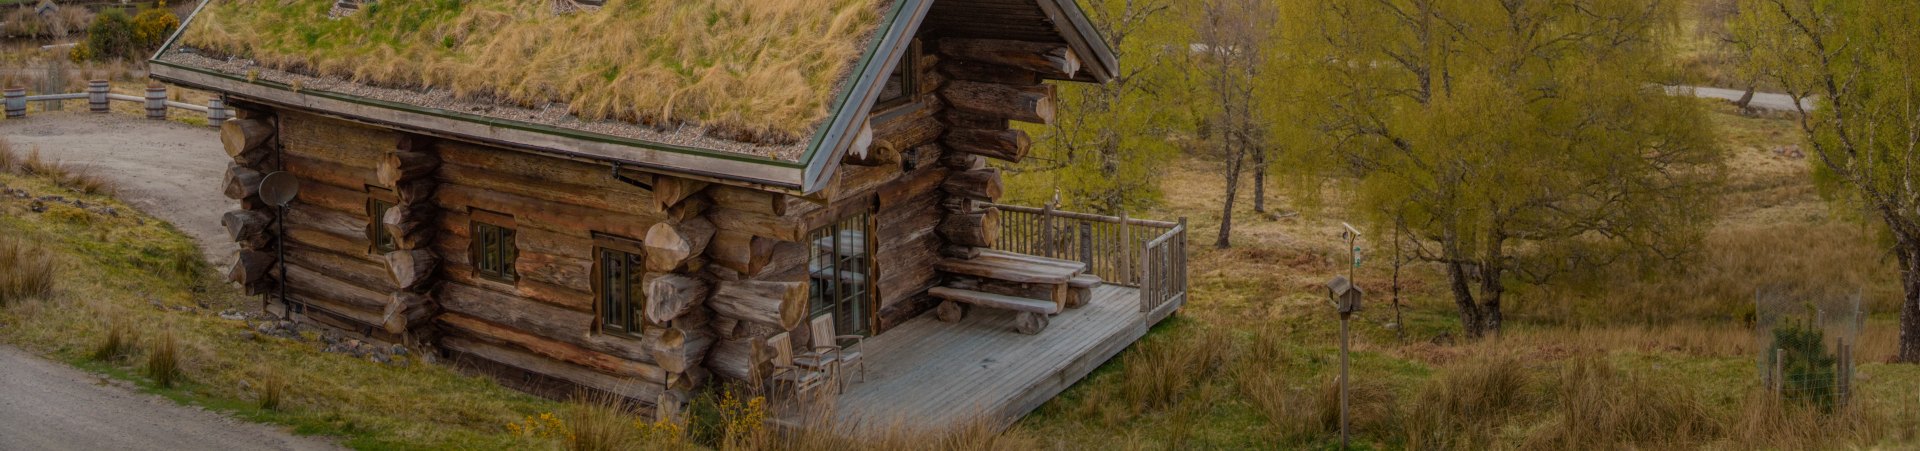 An Eagle Brae Cabin set in the natural landscape of the Scottish Highlands. Our best Self Catering holidays in Scotland.